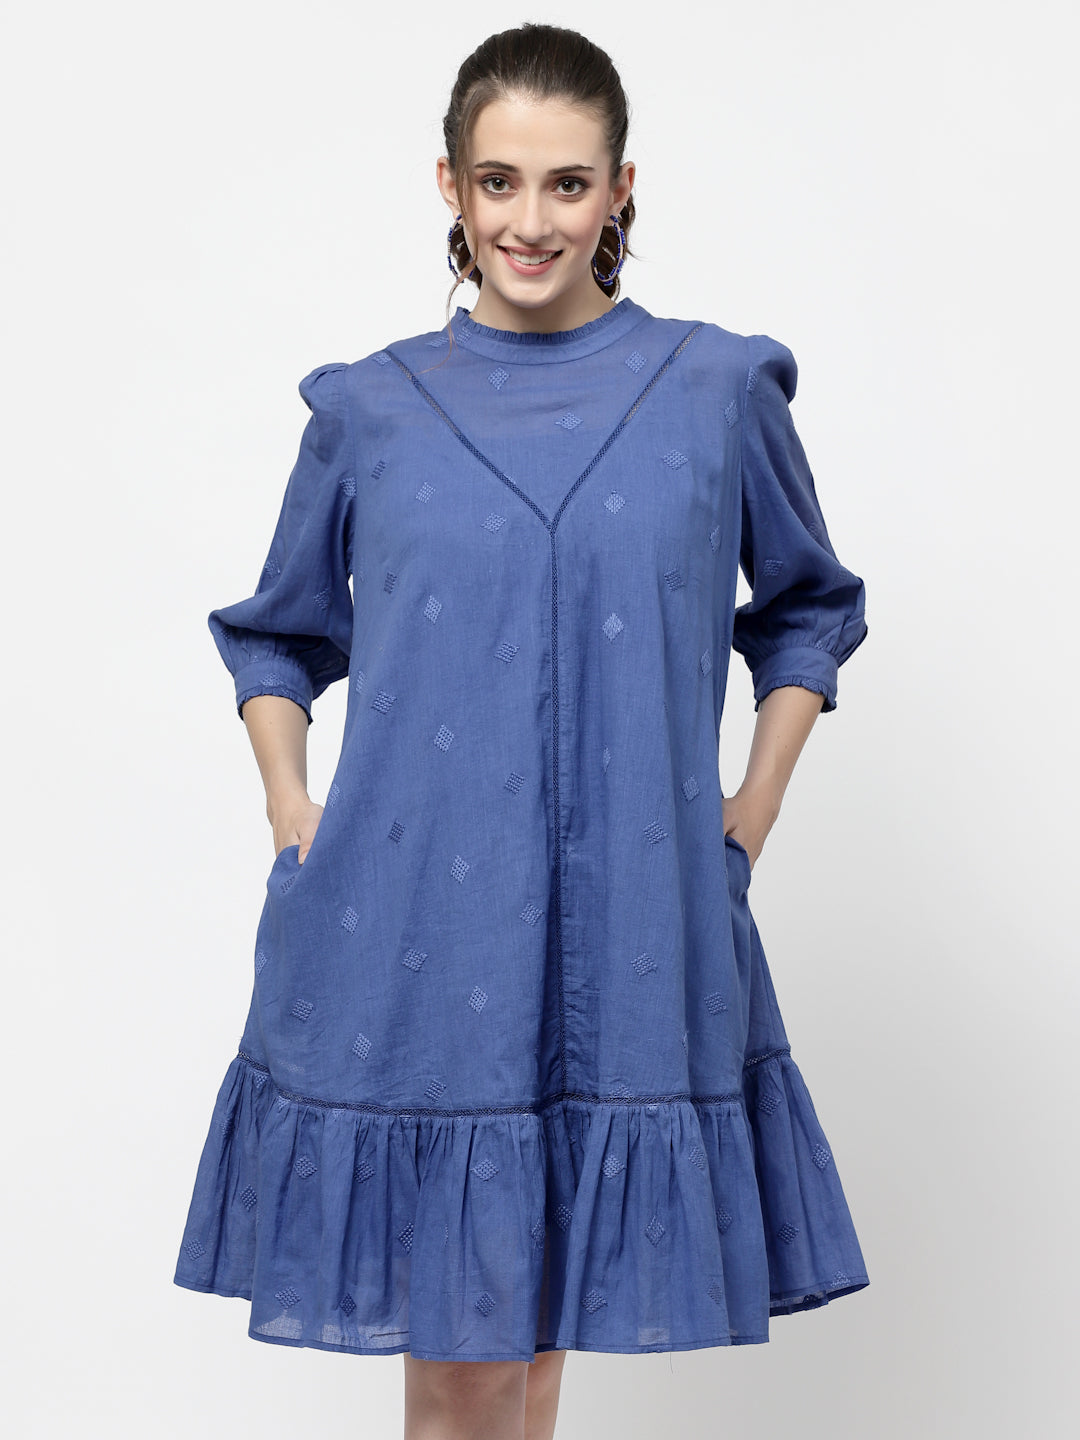 Terquois Stylish A-line Casual Dress Emblished with Lace and Has Ruffle Round Neck Dresses TERQUOIS   